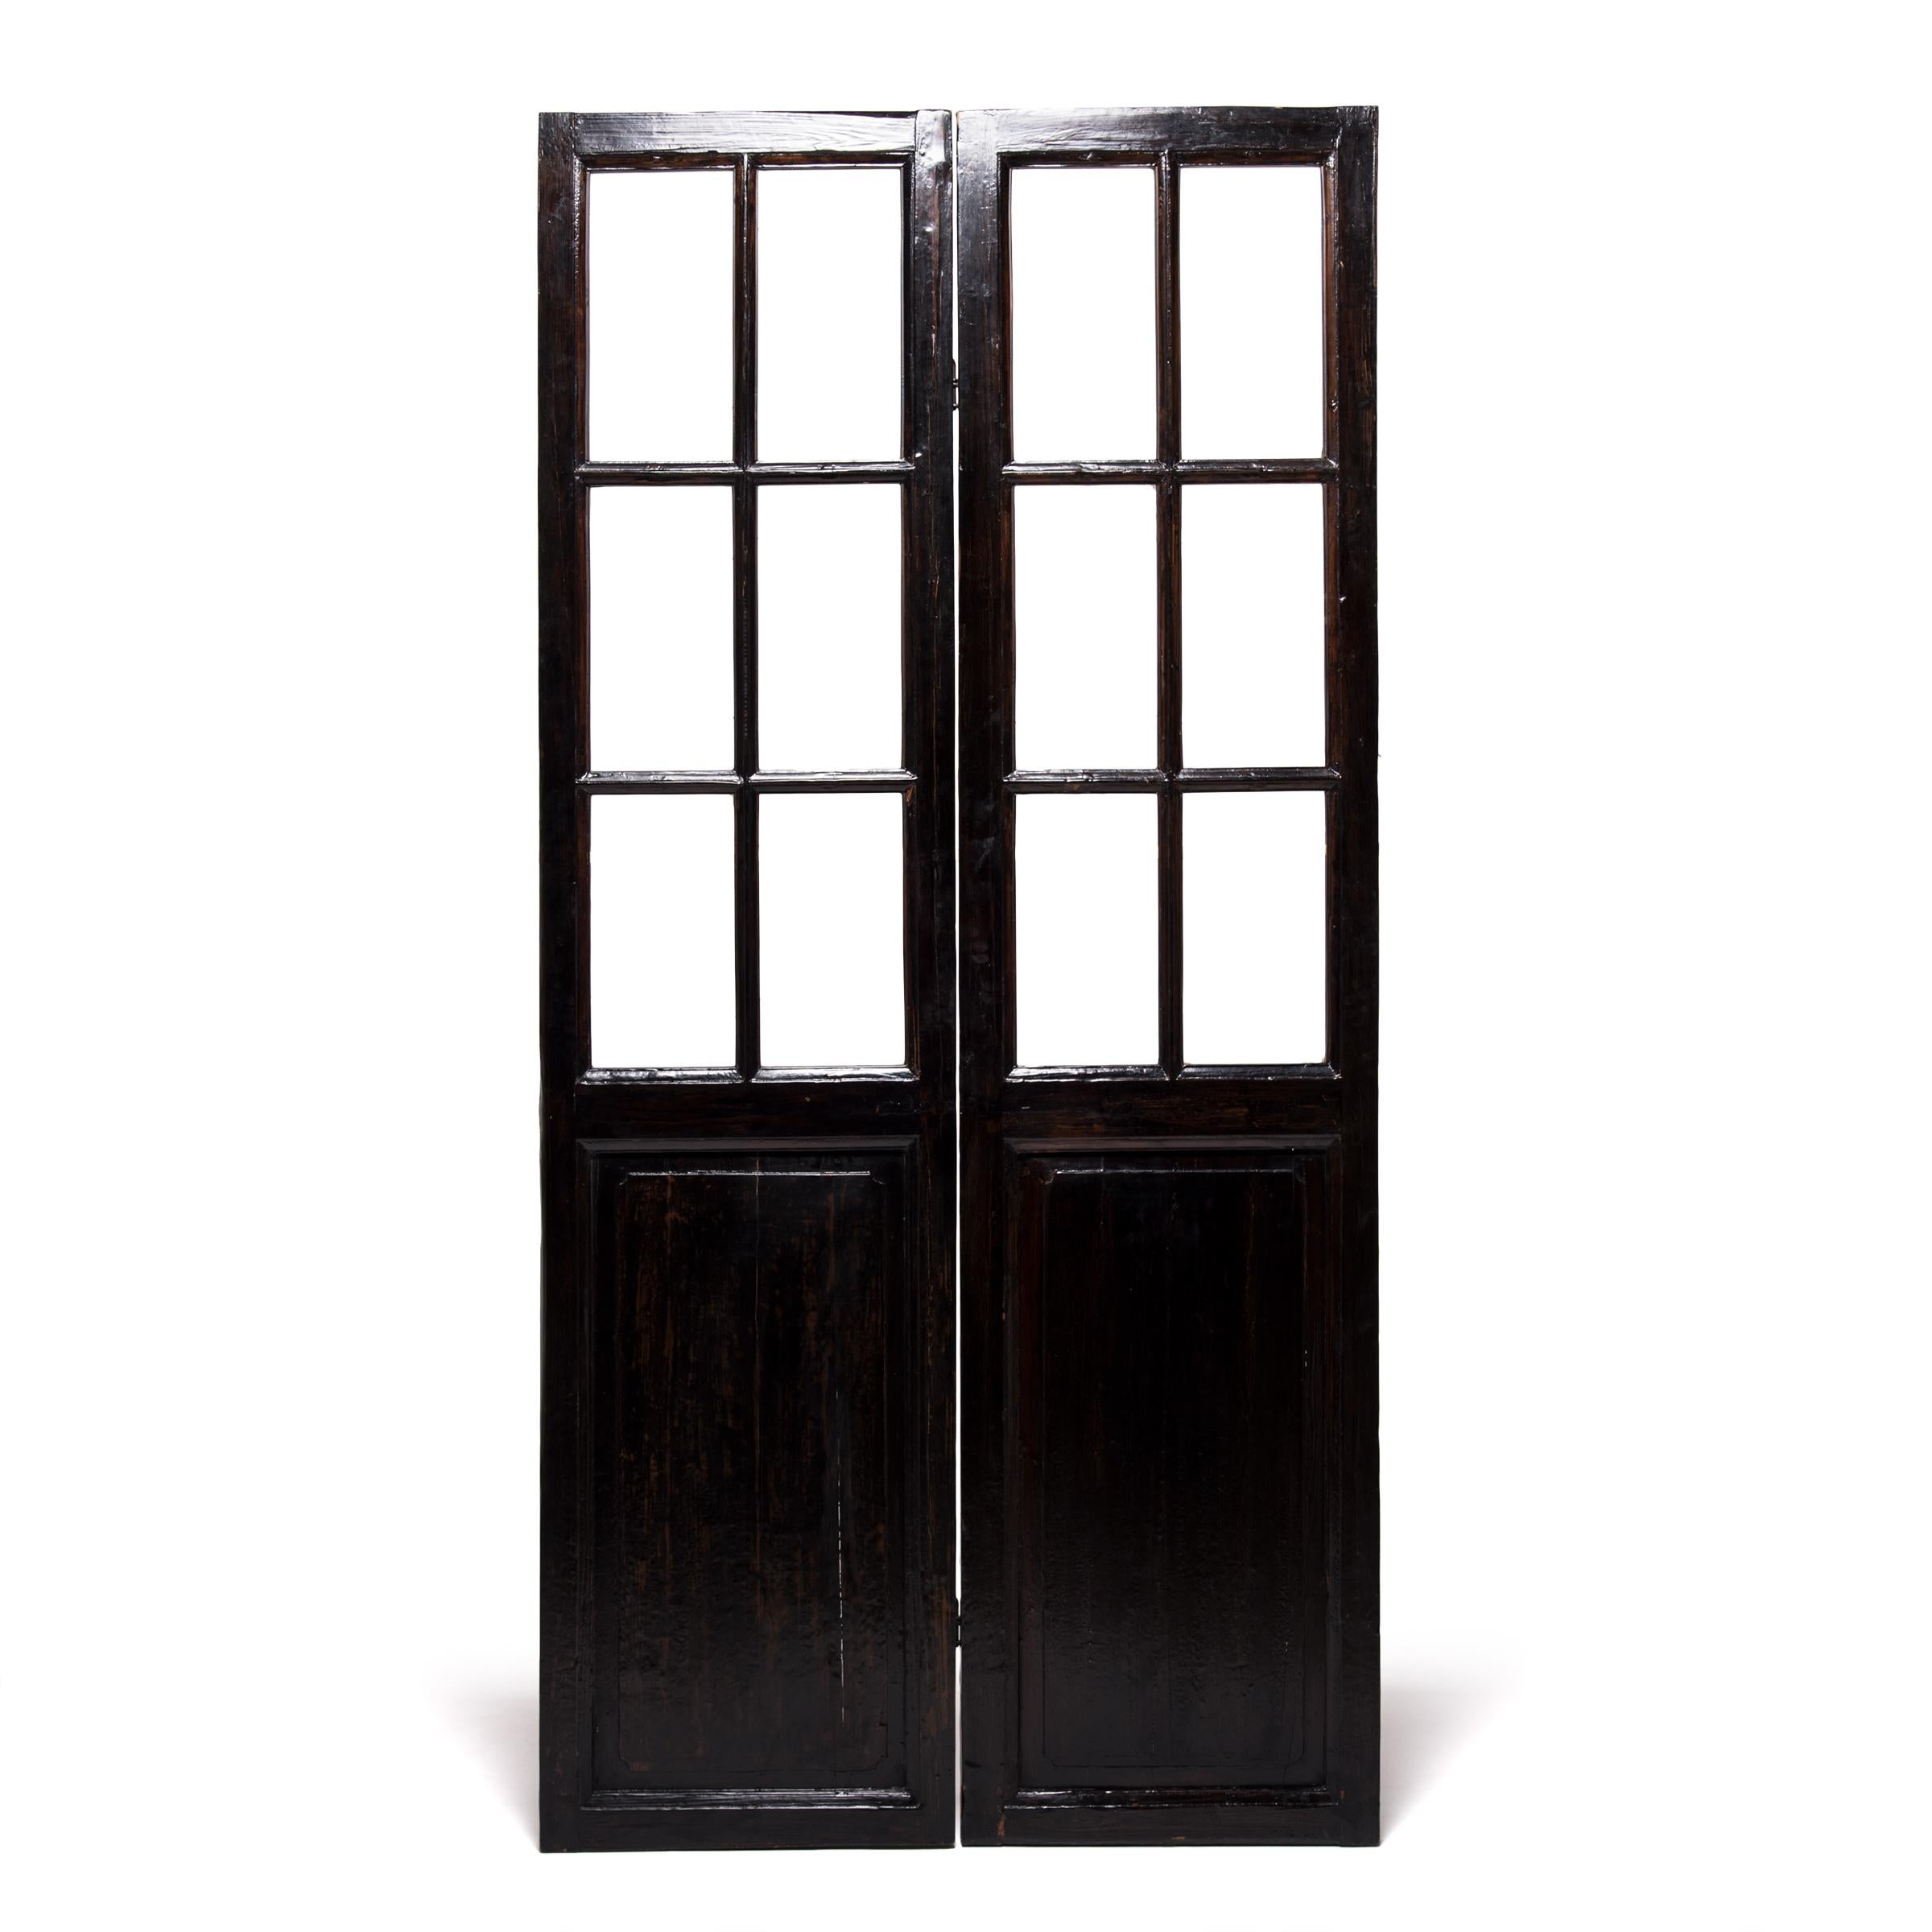 A hallmark of Qing-dynasty domestic architecture, these hand carved doors were originally used in a Provincial courtyard home to allow light and air into a room while maintaining privacy. Paned glass balances the dark-lacquered elmwood frame,